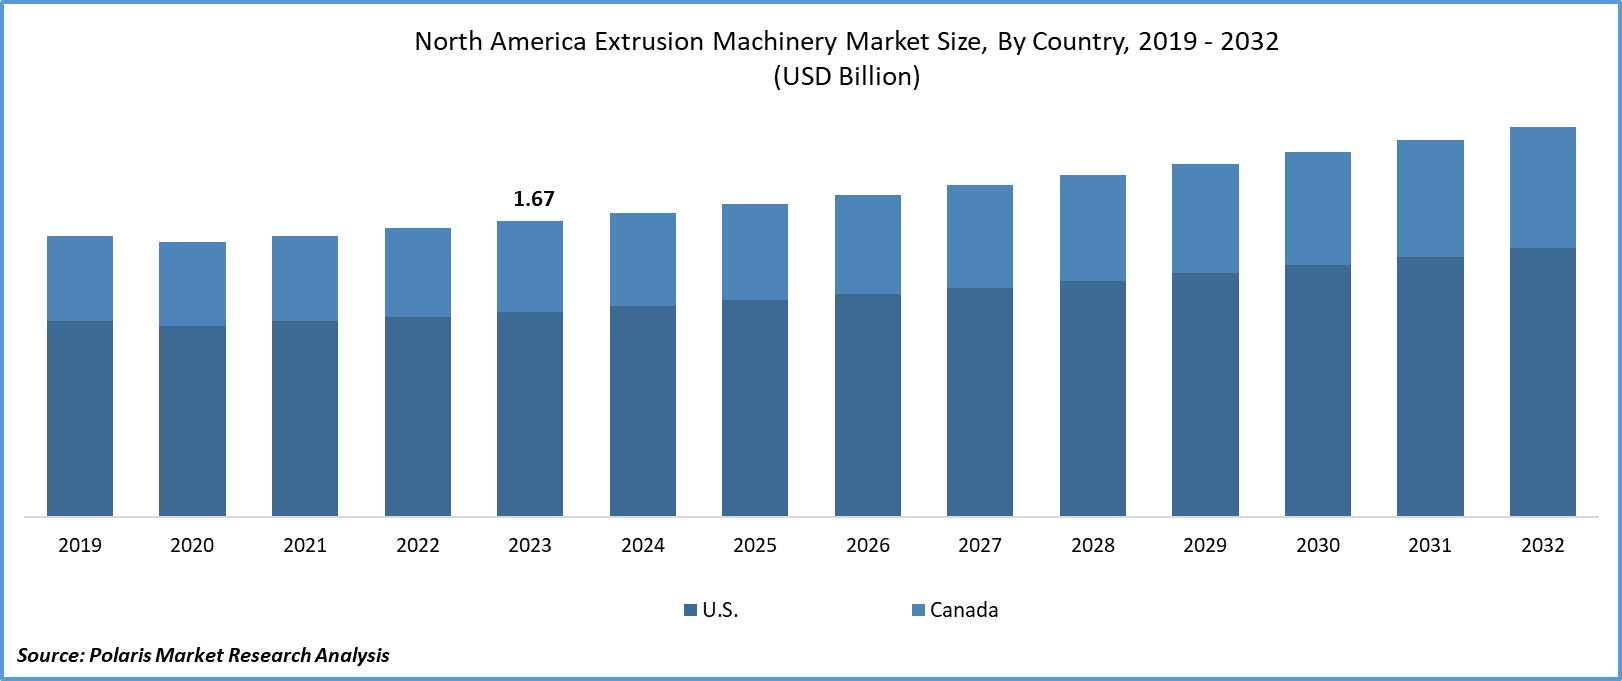 North America Extrusion Machinery Market Size